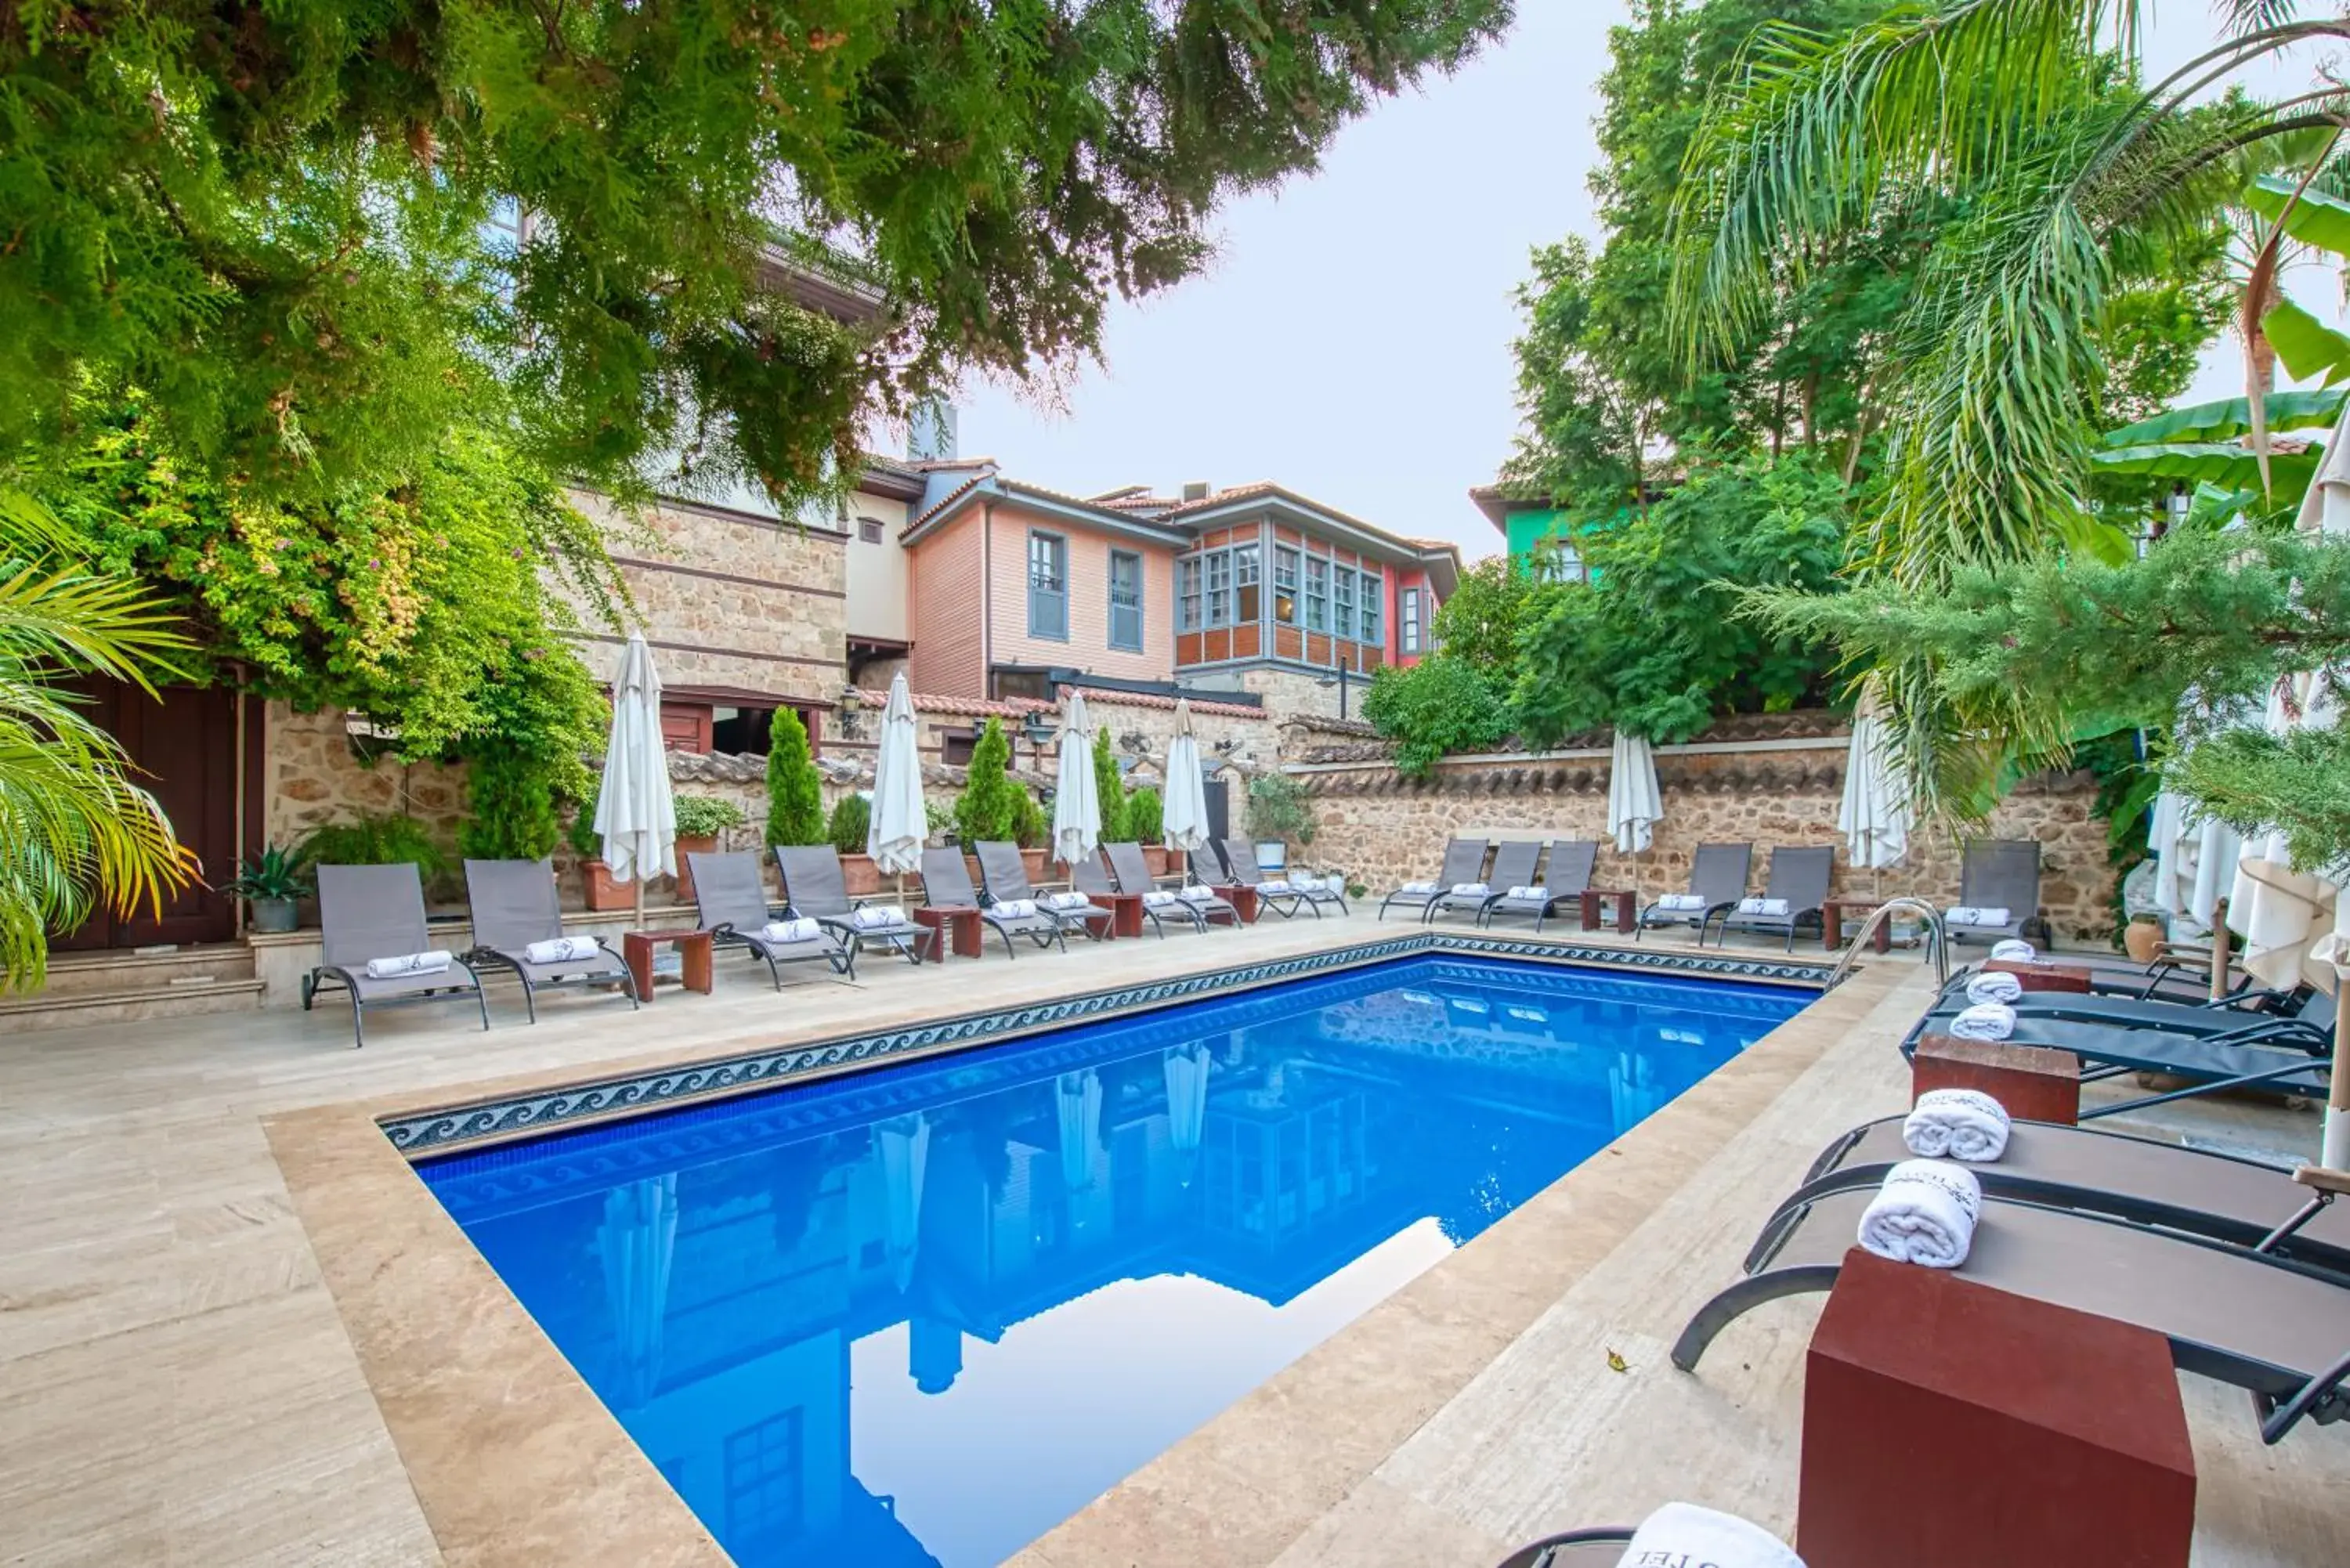 Property building, Swimming Pool in Tuvana Hotel